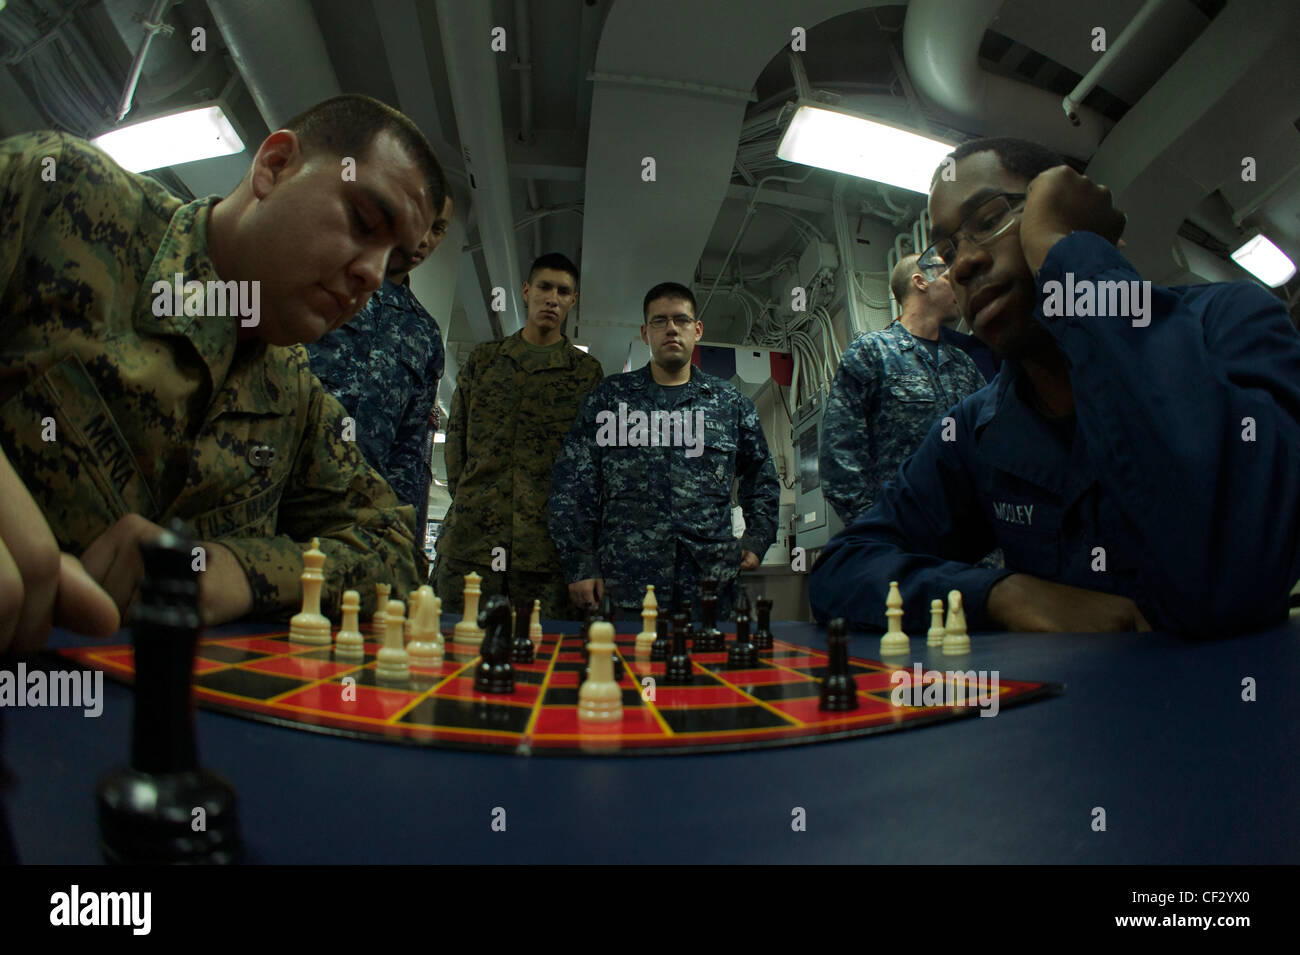 PACIFIC OCEAN (Feb. 28, 2012) Sailors and Marines participate in a chess tournament in the mess decks of the amphibious assault ship USS Bonhomme Richard (LHD 6). The ship is en route to relieve USS Essex (LHD 2) as the forward deployed ship in Sasebo, Japan Stock Photo